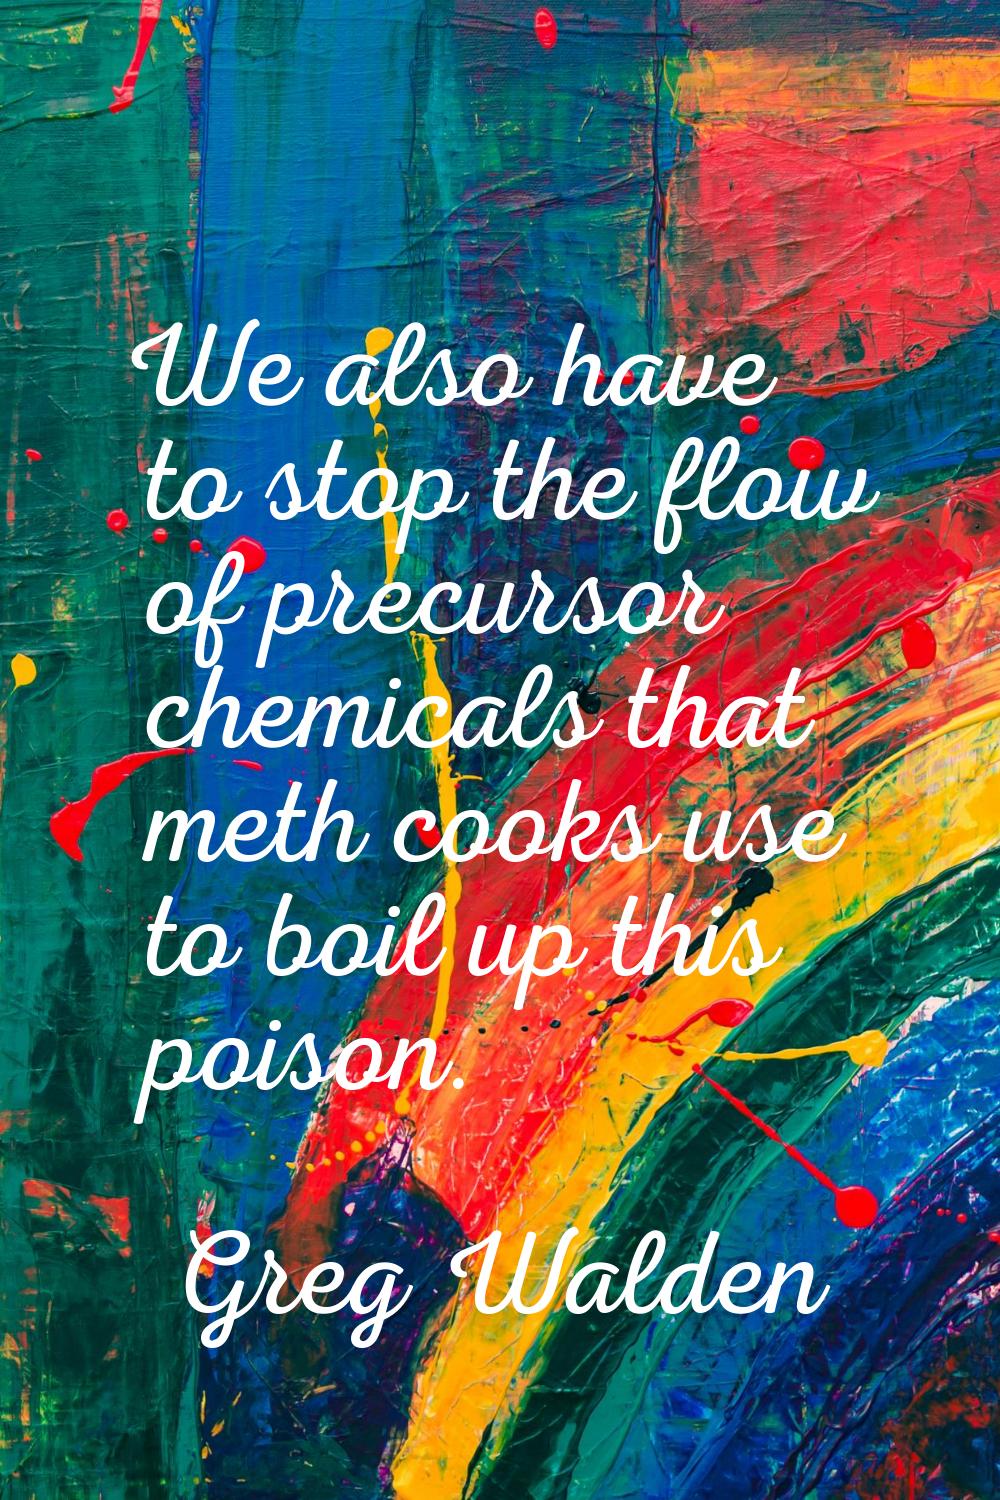 We also have to stop the flow of precursor chemicals that meth cooks use to boil up this poison.